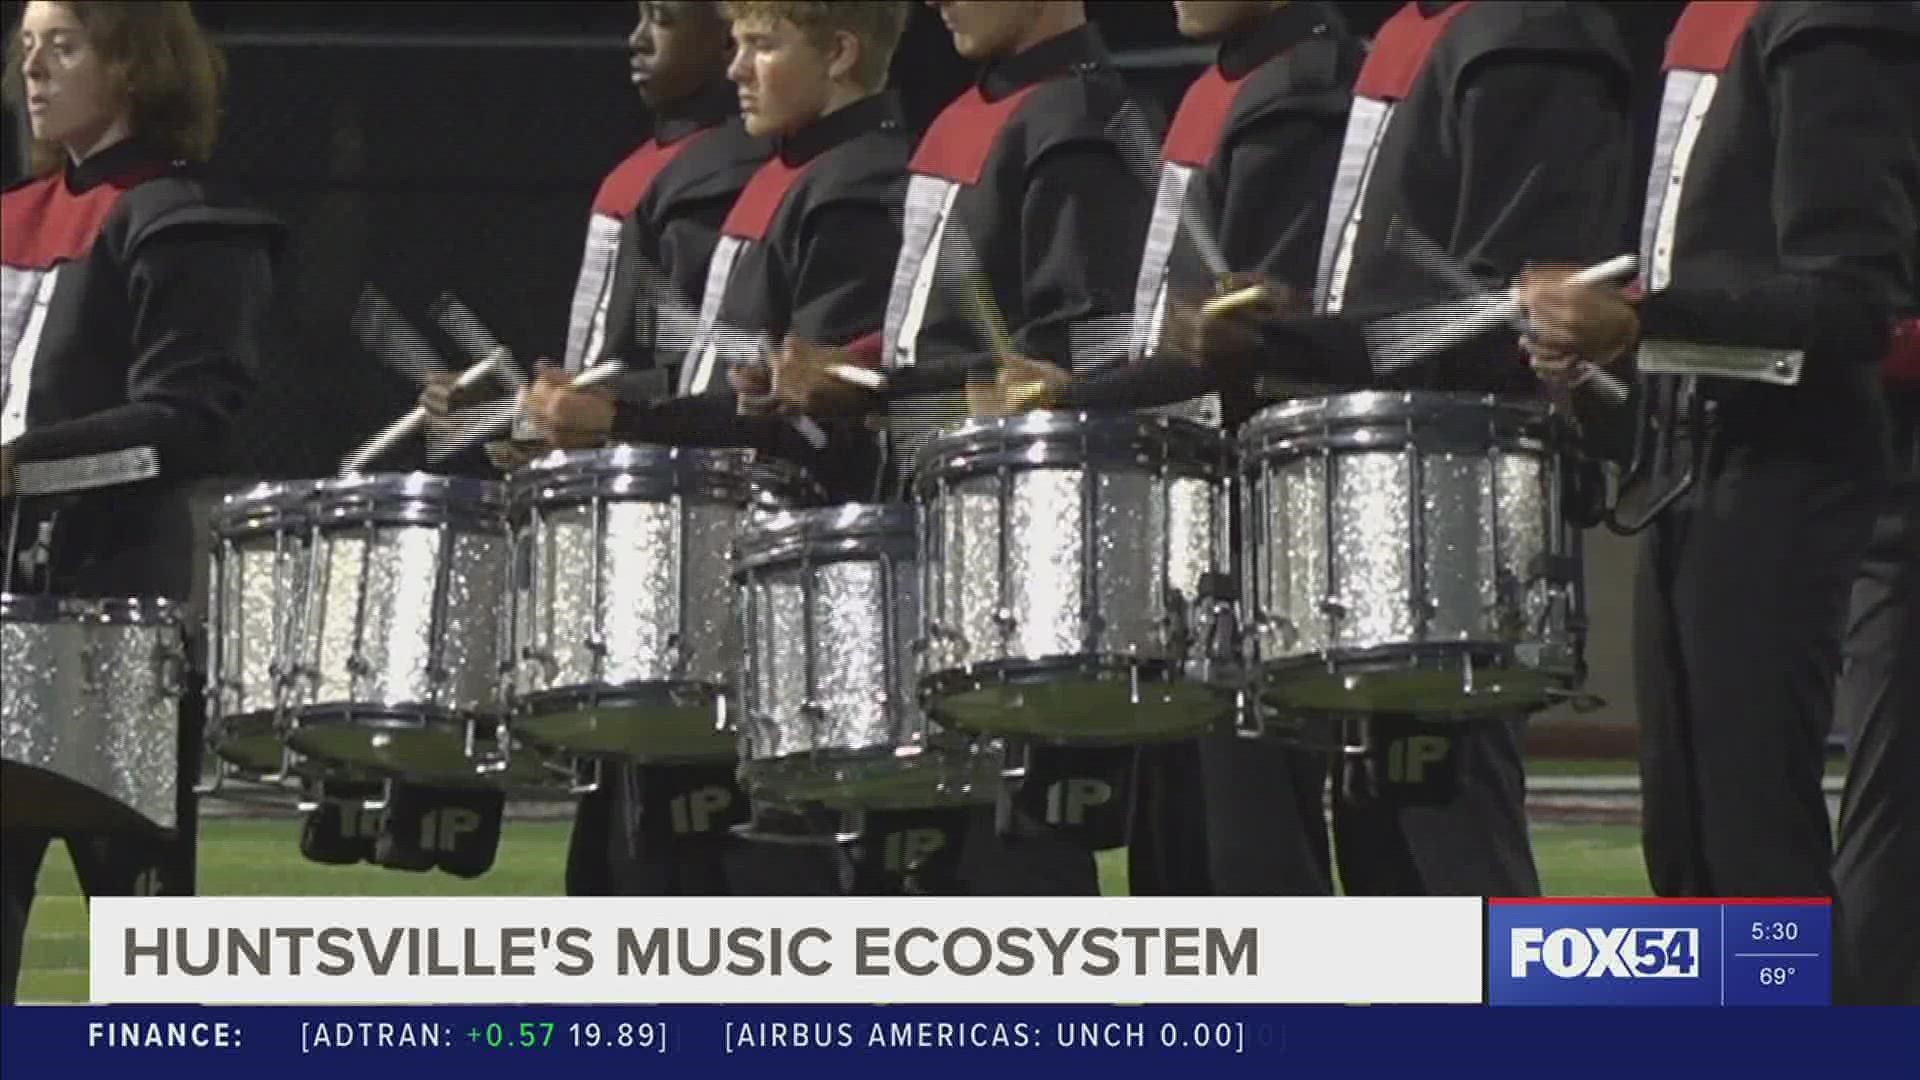 During Huntsville Music Month, the city hosted successful examples of music education and its continuing in those efforts